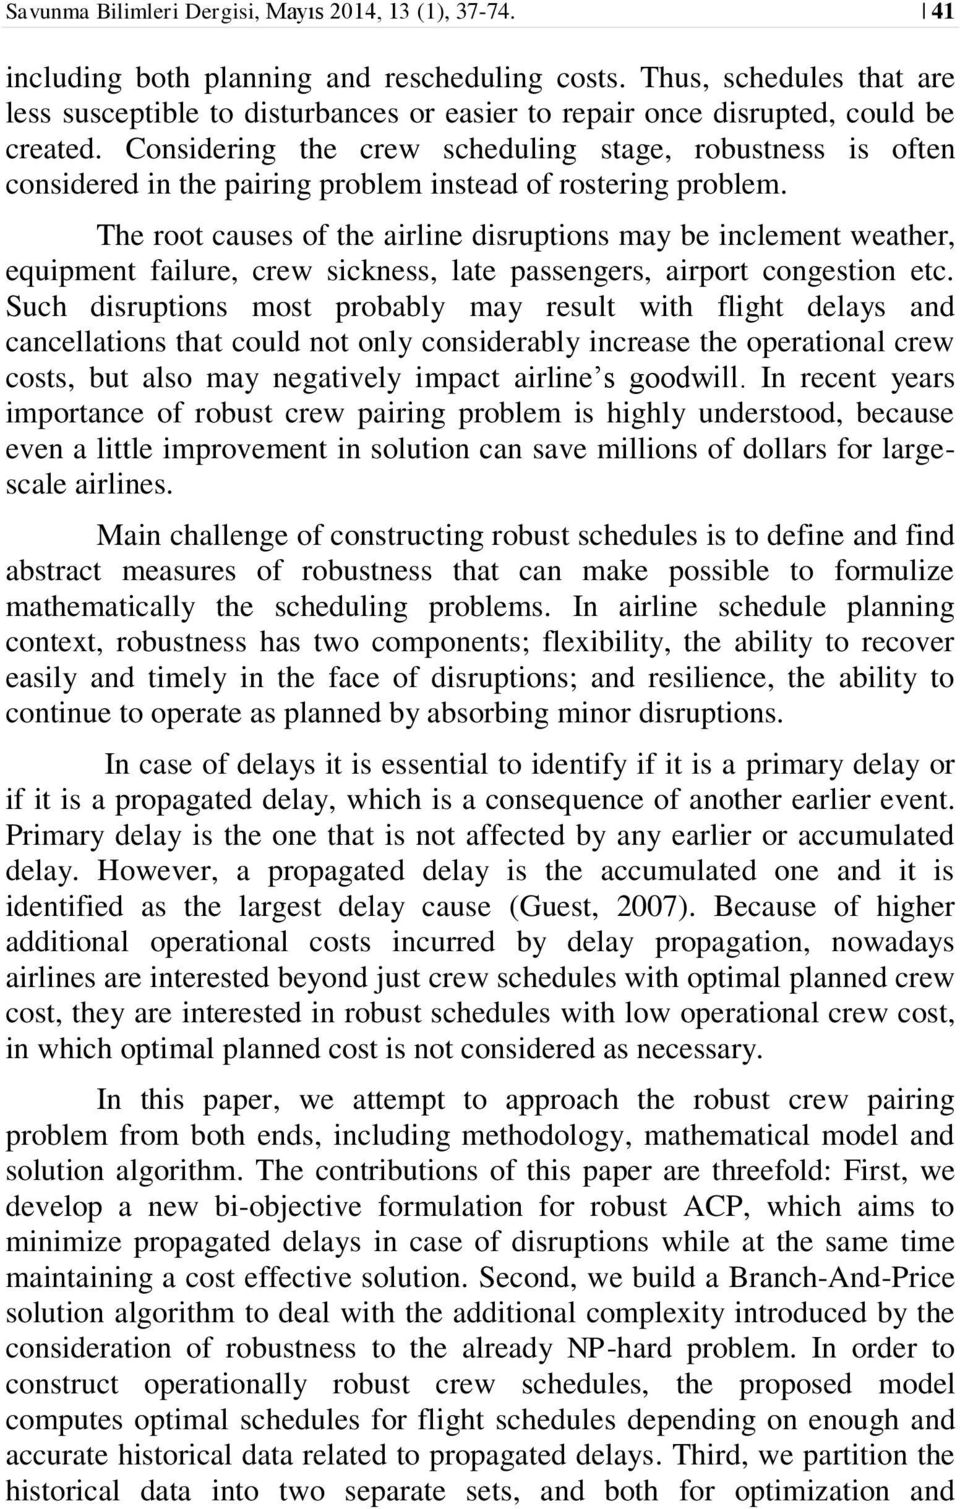 Considering the crew scheduling stage, robustness is often considered in the pairing problem instead of rostering problem.